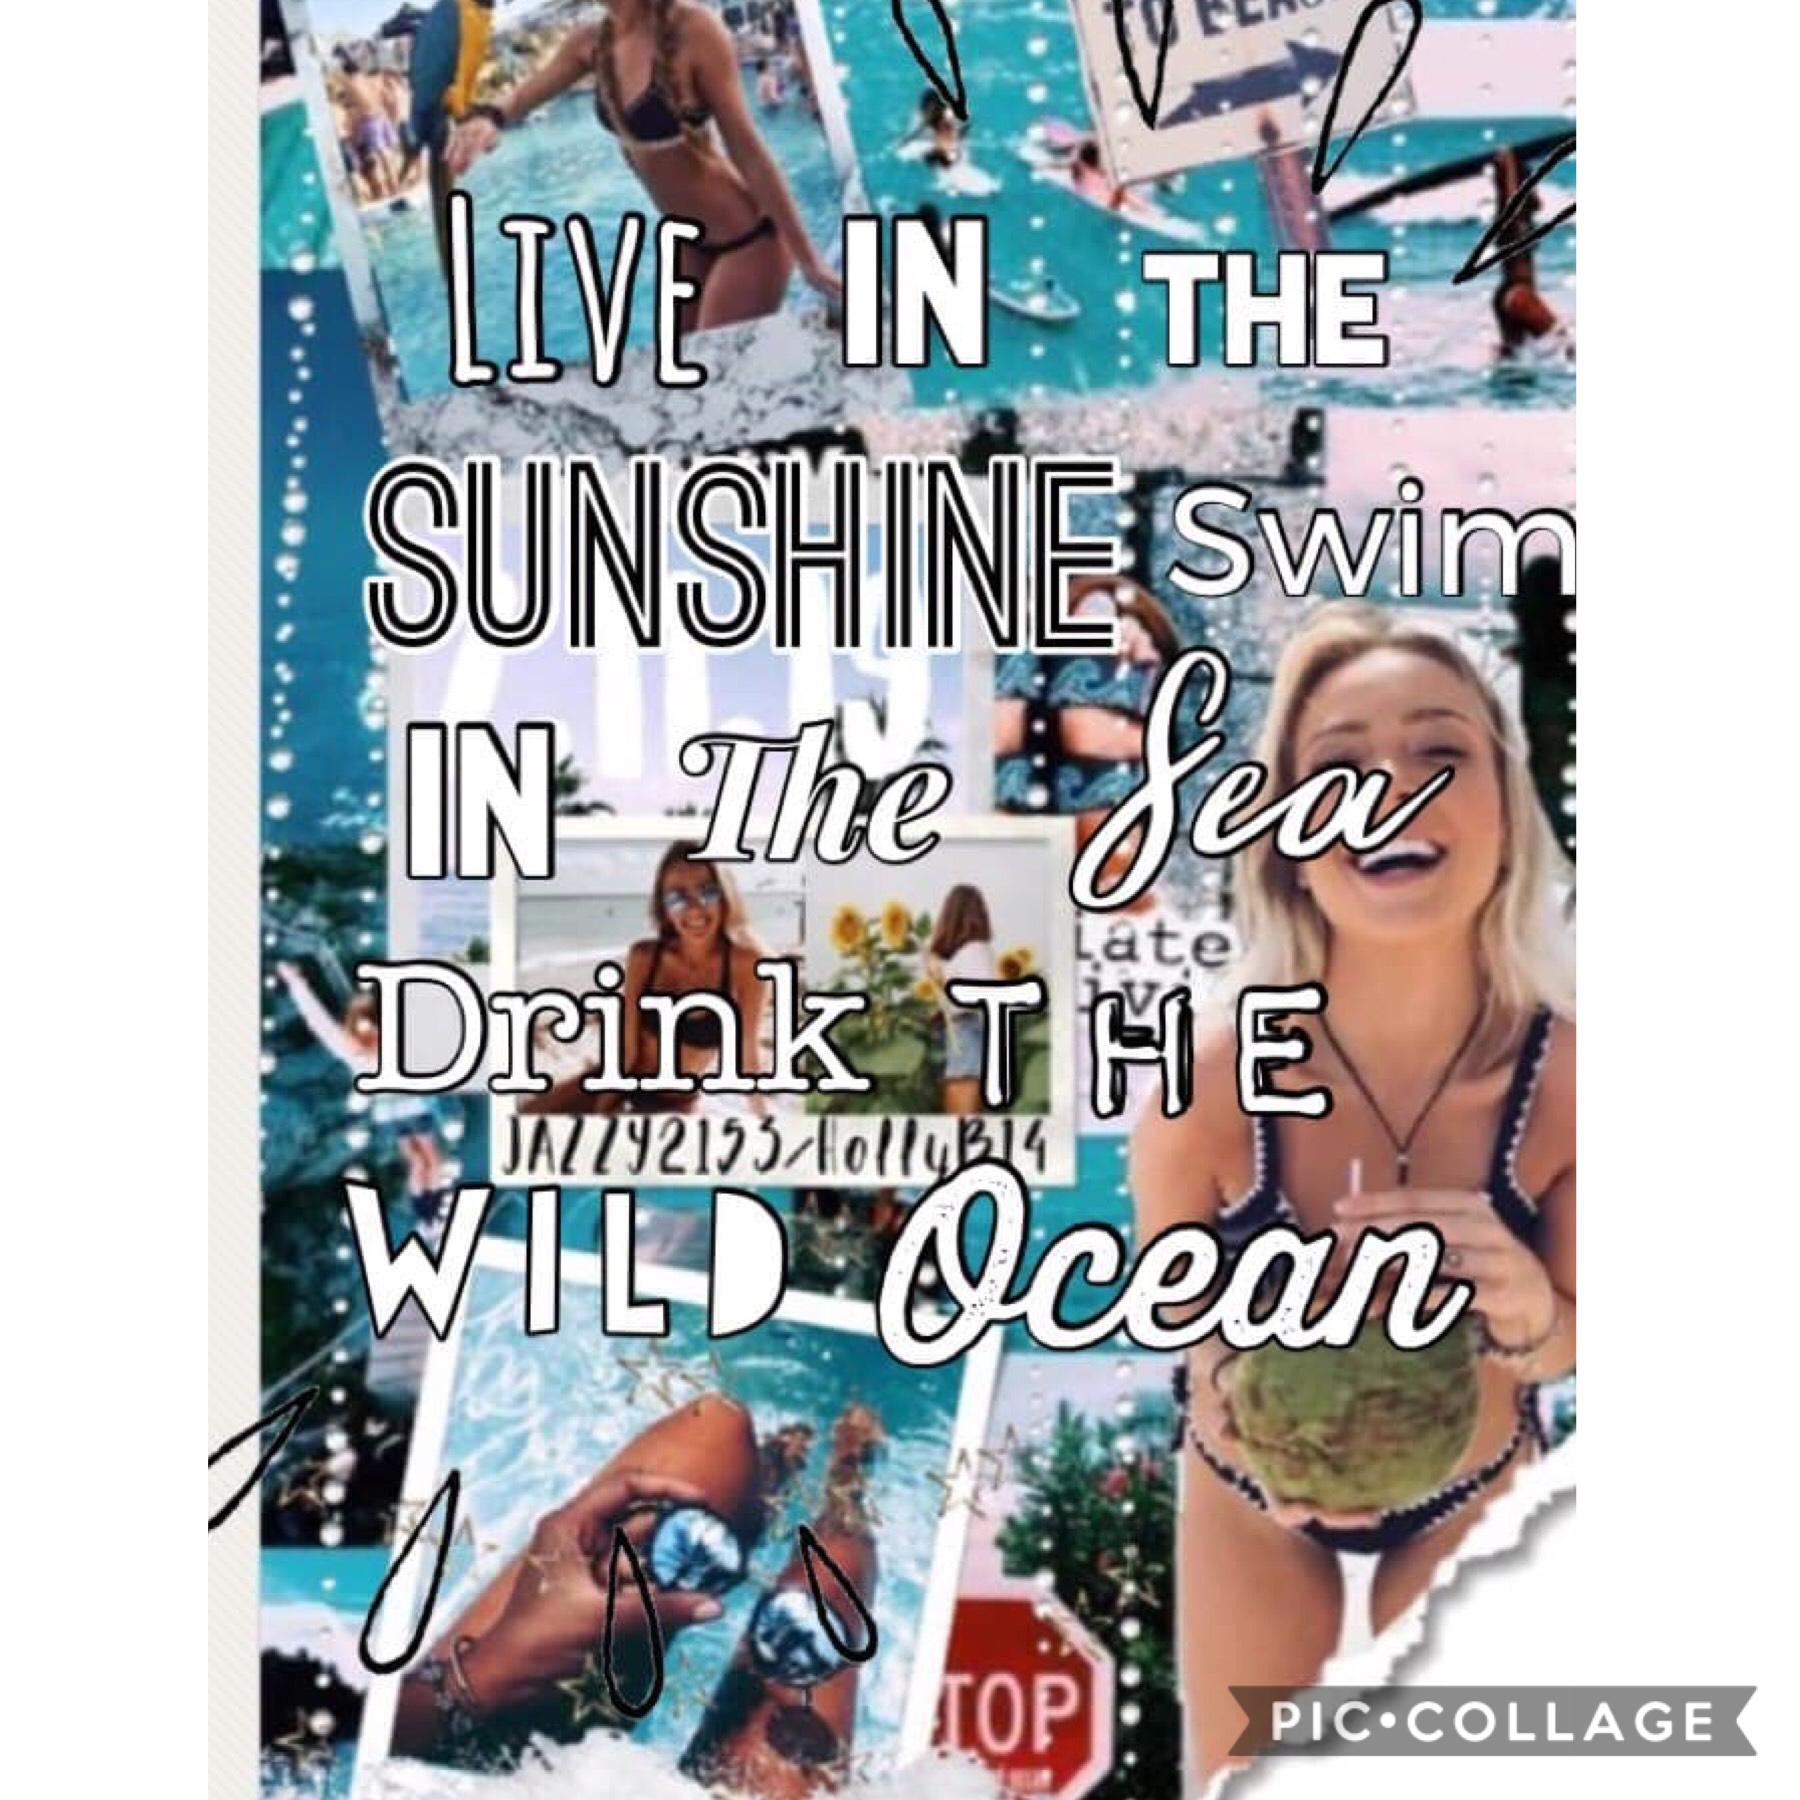 🐳tap🐳
•Collab with -JAZZY2153- pls. Go follow her she is a awesome collager and friend. Hey, let me know in the comments if you would like me to do shoutouts.